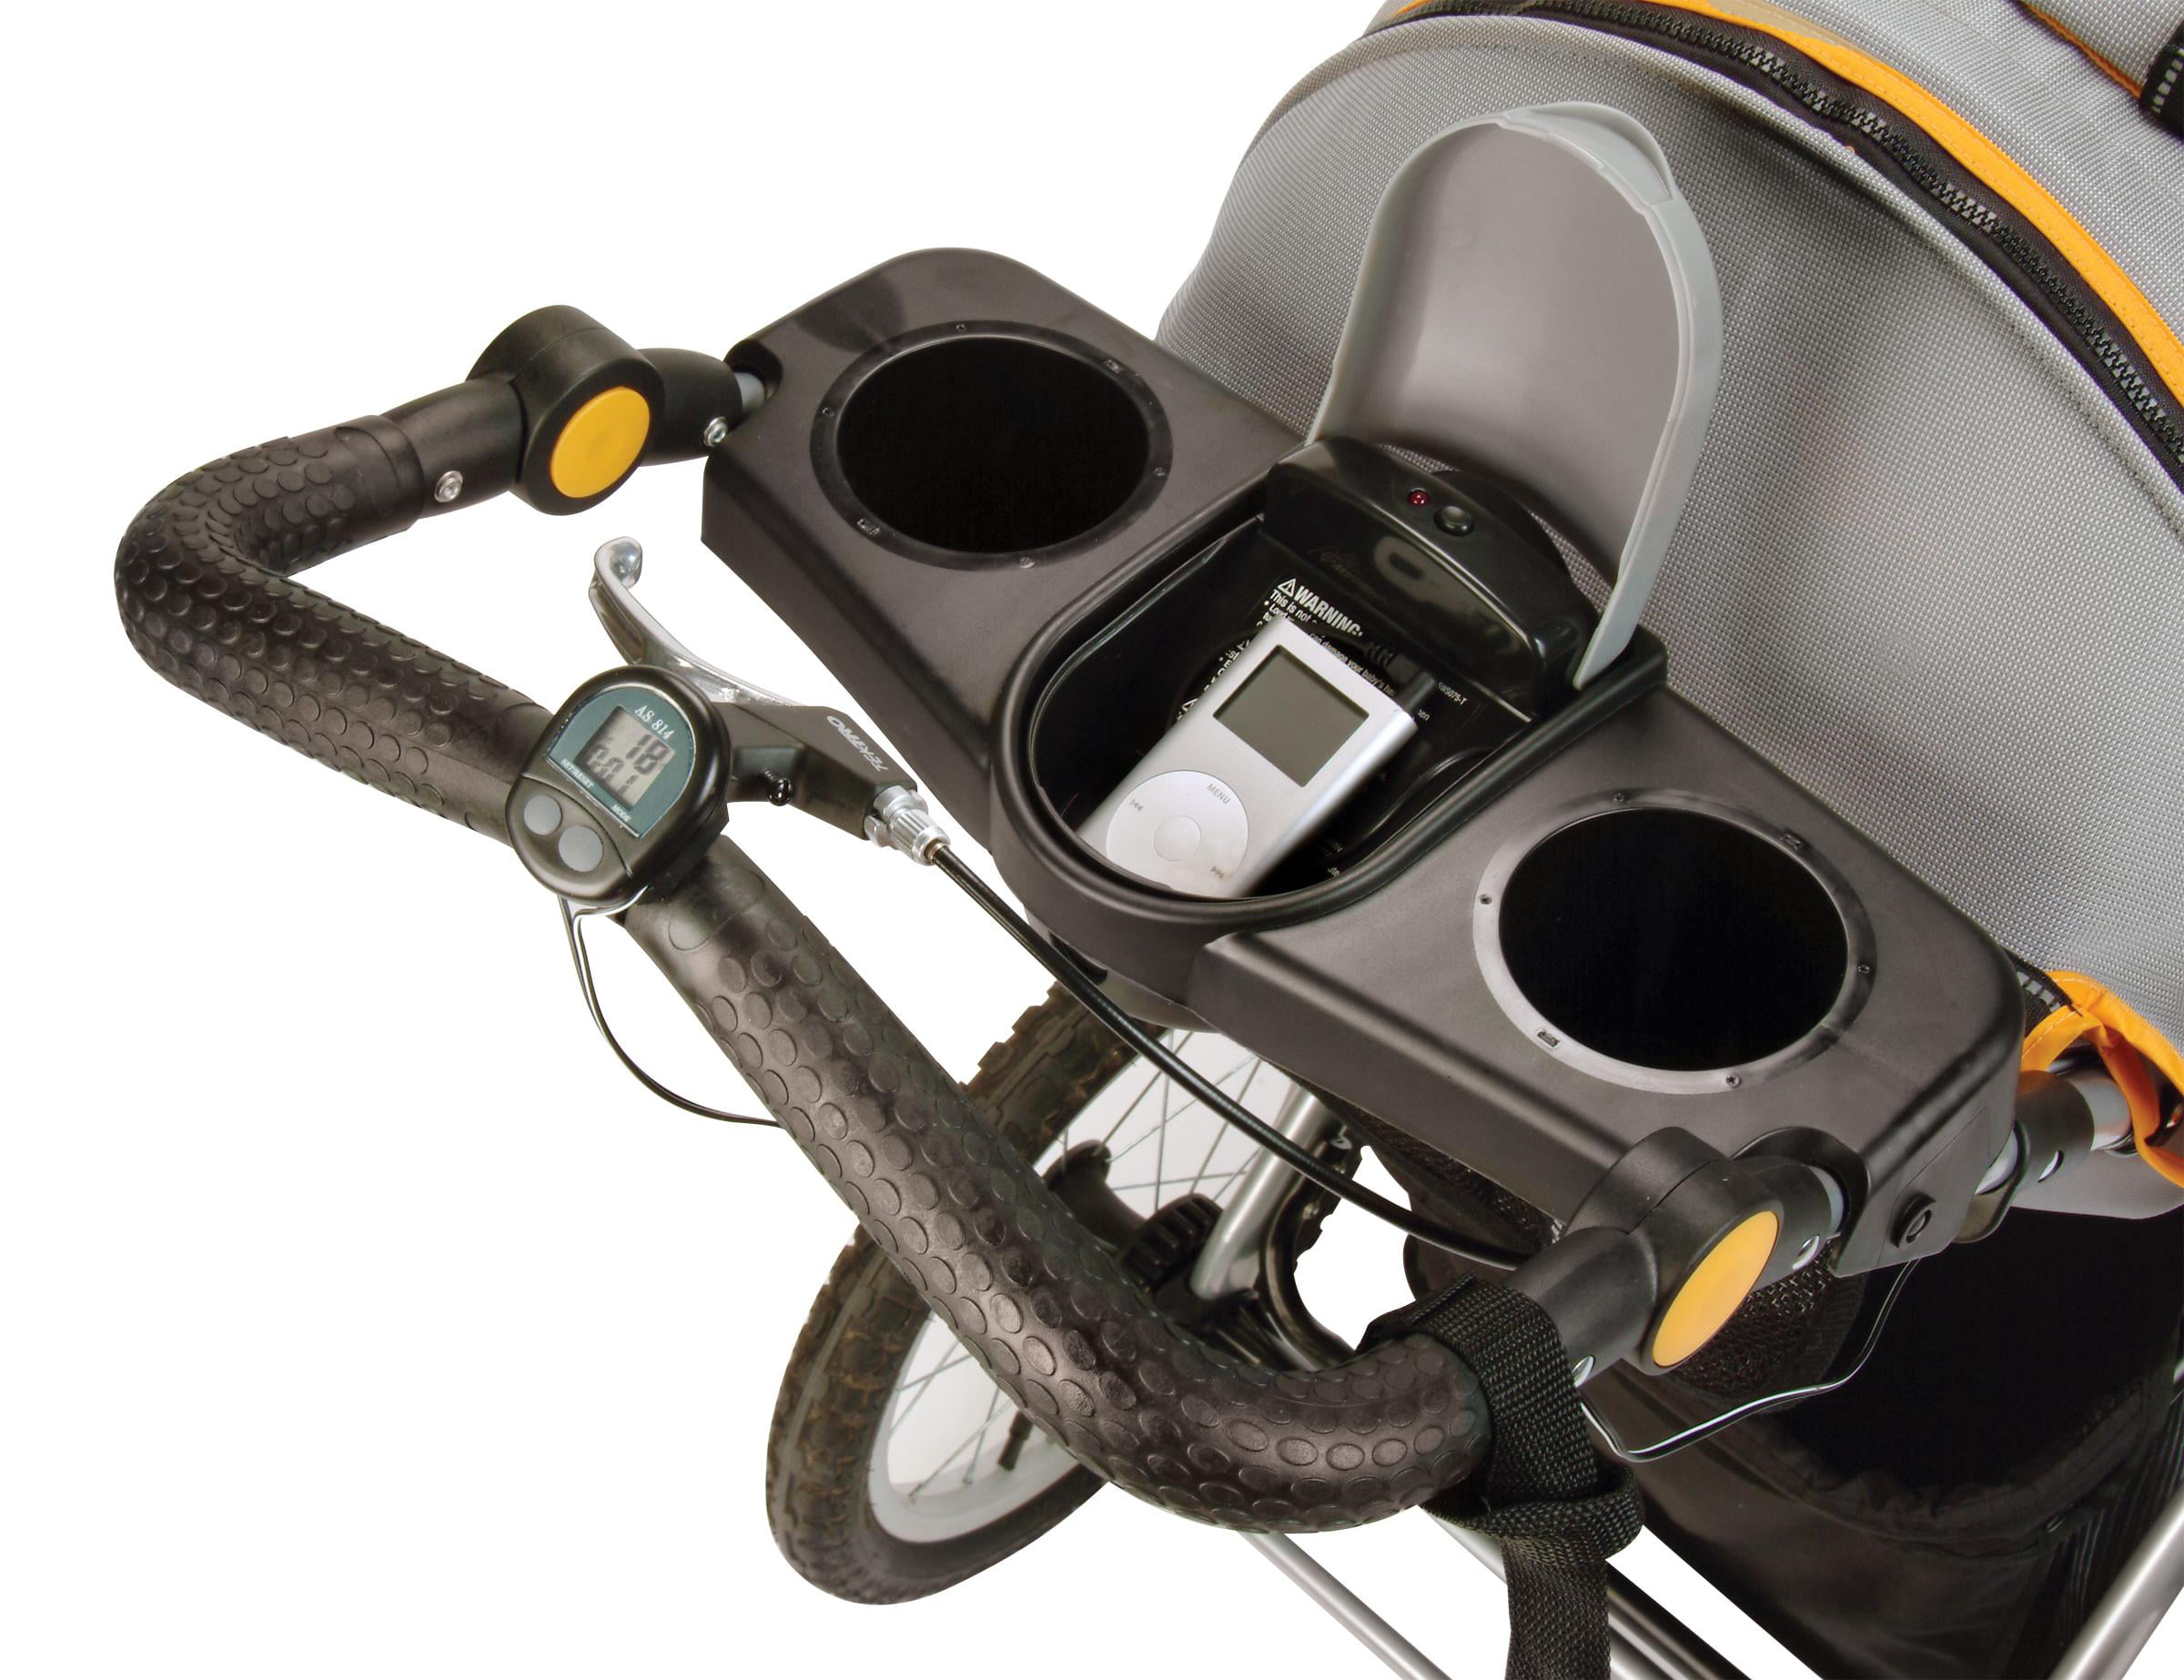 jeep overland limited jogging stroller recall